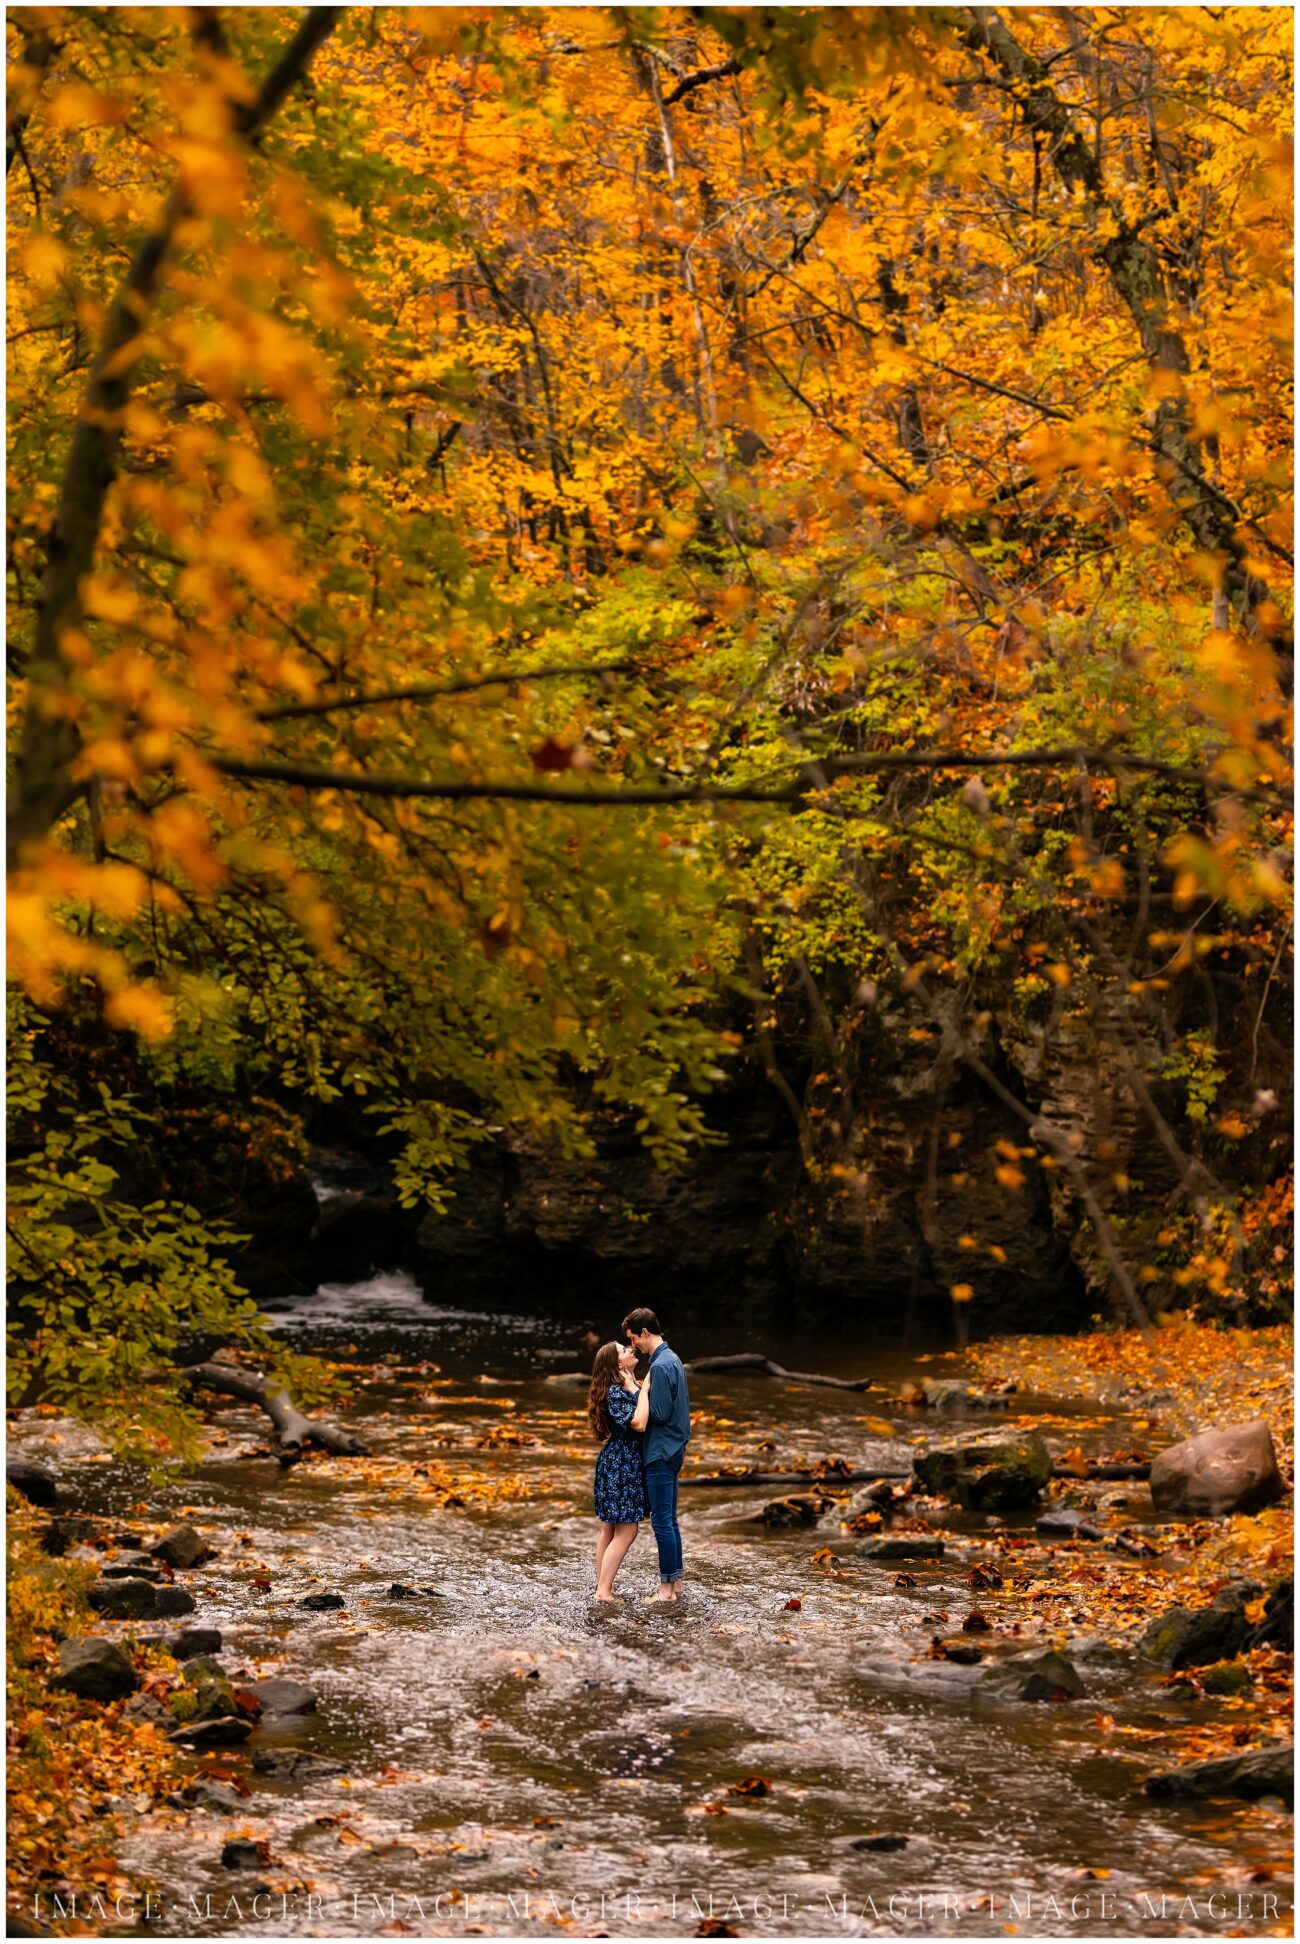 barefoot couple staning in water in fall chicago